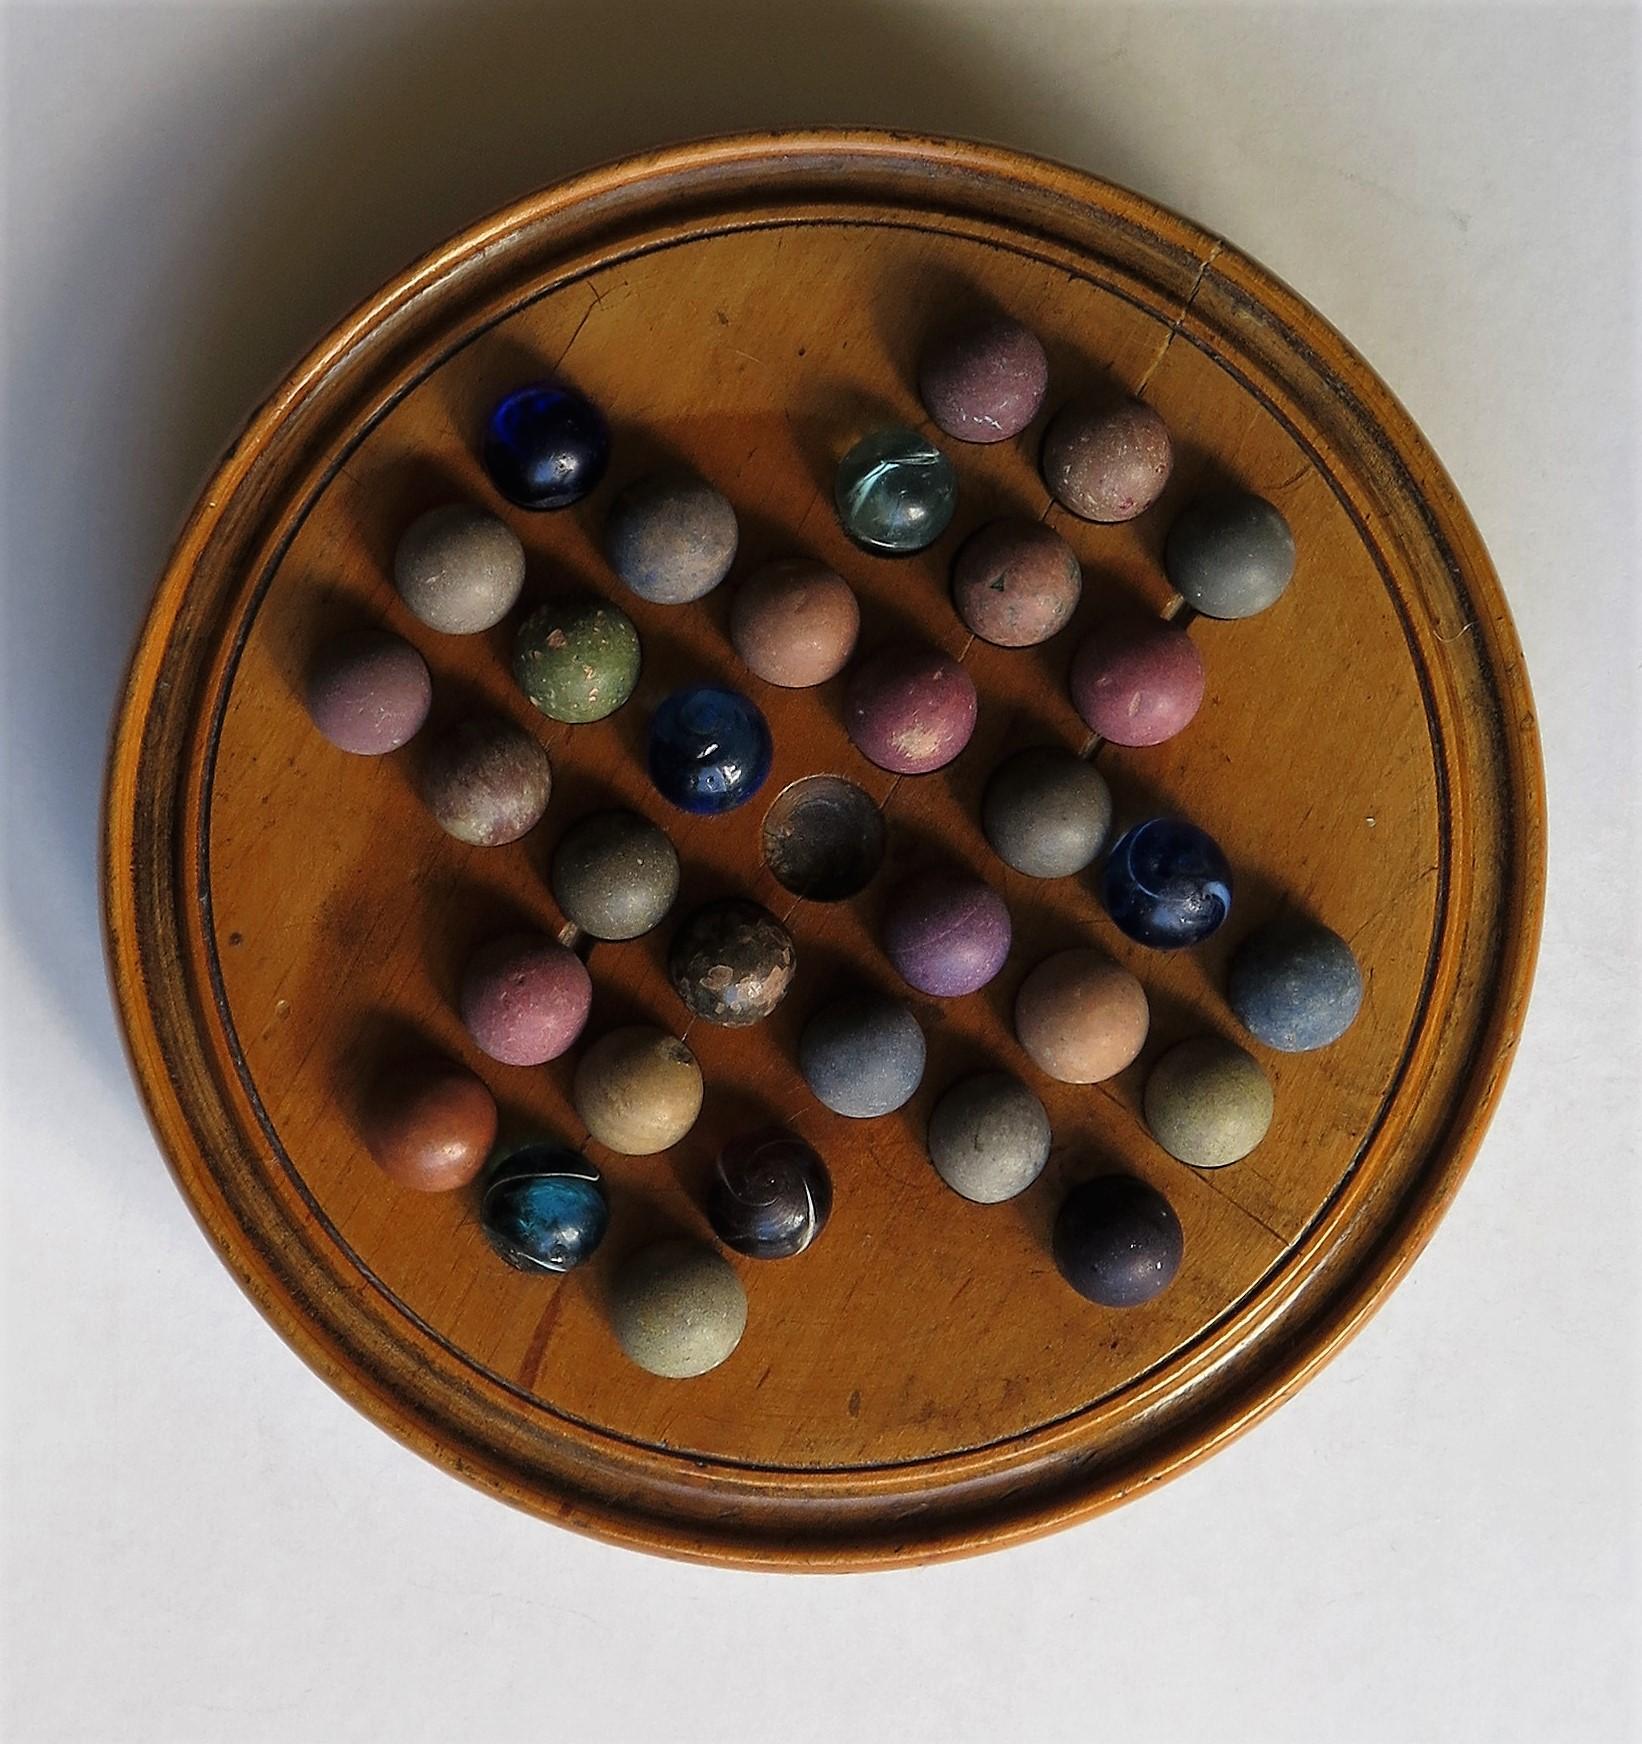 Stone 19th Century Travelling Marble Solitaire Board Game, with 32 Handmade Marbles